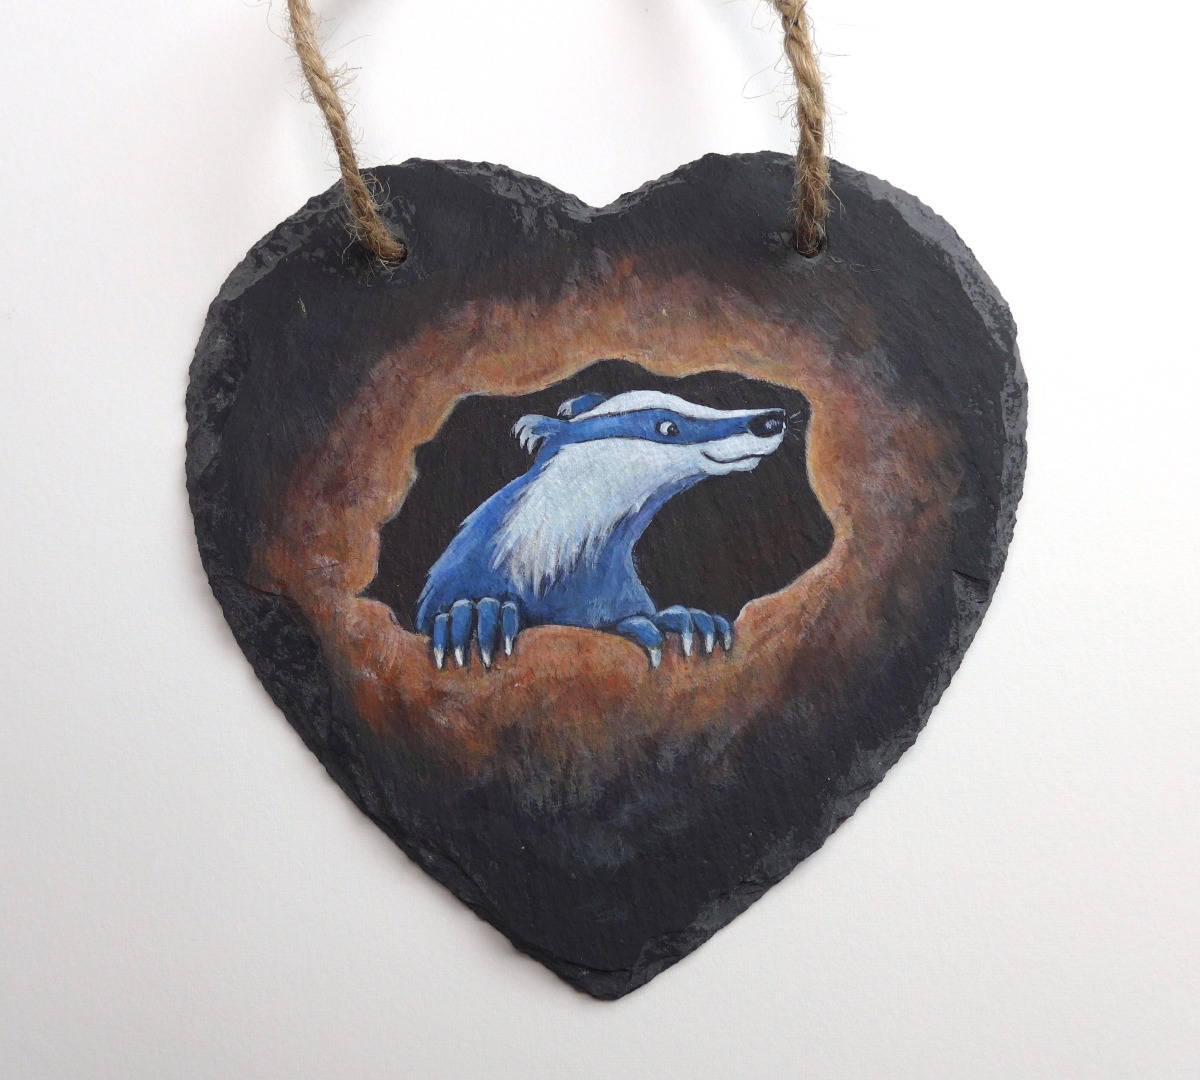 15cm x 15cm Slate Heart with Original Painting of a Badlger by artist Diane Young